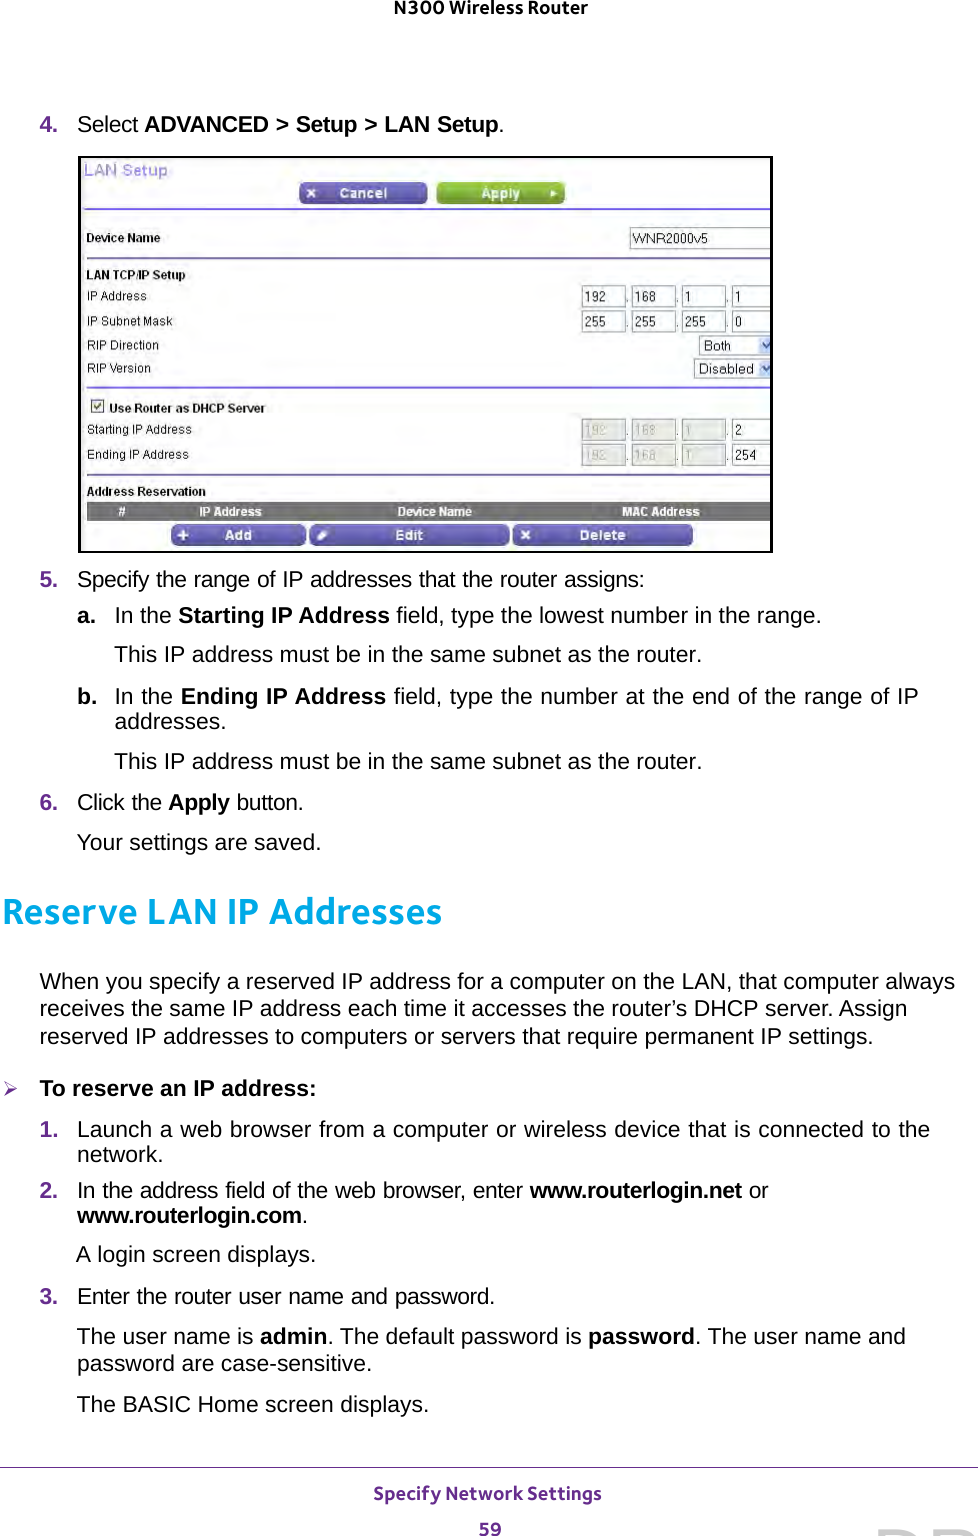 Specify Network Settings 59 N300 Wireless Router4.  Select ADVANCED &gt; Setup &gt; LAN Setup.5.  Specify the range of IP addresses that the router assigns:a. In the Starting IP Address field, type the lowest number in the range.This IP address must be in the same subnet as the router.b.  In the Ending IP Address field, type the number at the end of the range of IP addresses.This IP address must be in the same subnet as the router.6.  Click the Apply button.Your settings are saved.Reserve LAN IP AddressesWhen you specify a reserved IP address for a computer on the LAN, that computer always receives the same IP address each time it accesses the router’s DHCP server. Assign reserved IP addresses to computers or servers that require permanent IP settings. To reserve an IP address: 1.  Launch a web browser from a computer or wireless device that is connected to the network.2.  In the address field of the web browser, enter www.routerlogin.net or www.routerlogin.com.A login screen displays.3.  Enter the router user name and password.The user name is admin. The default password is password. The user name and password are case-sensitive.The BASIC Home screen displays.DRAFT